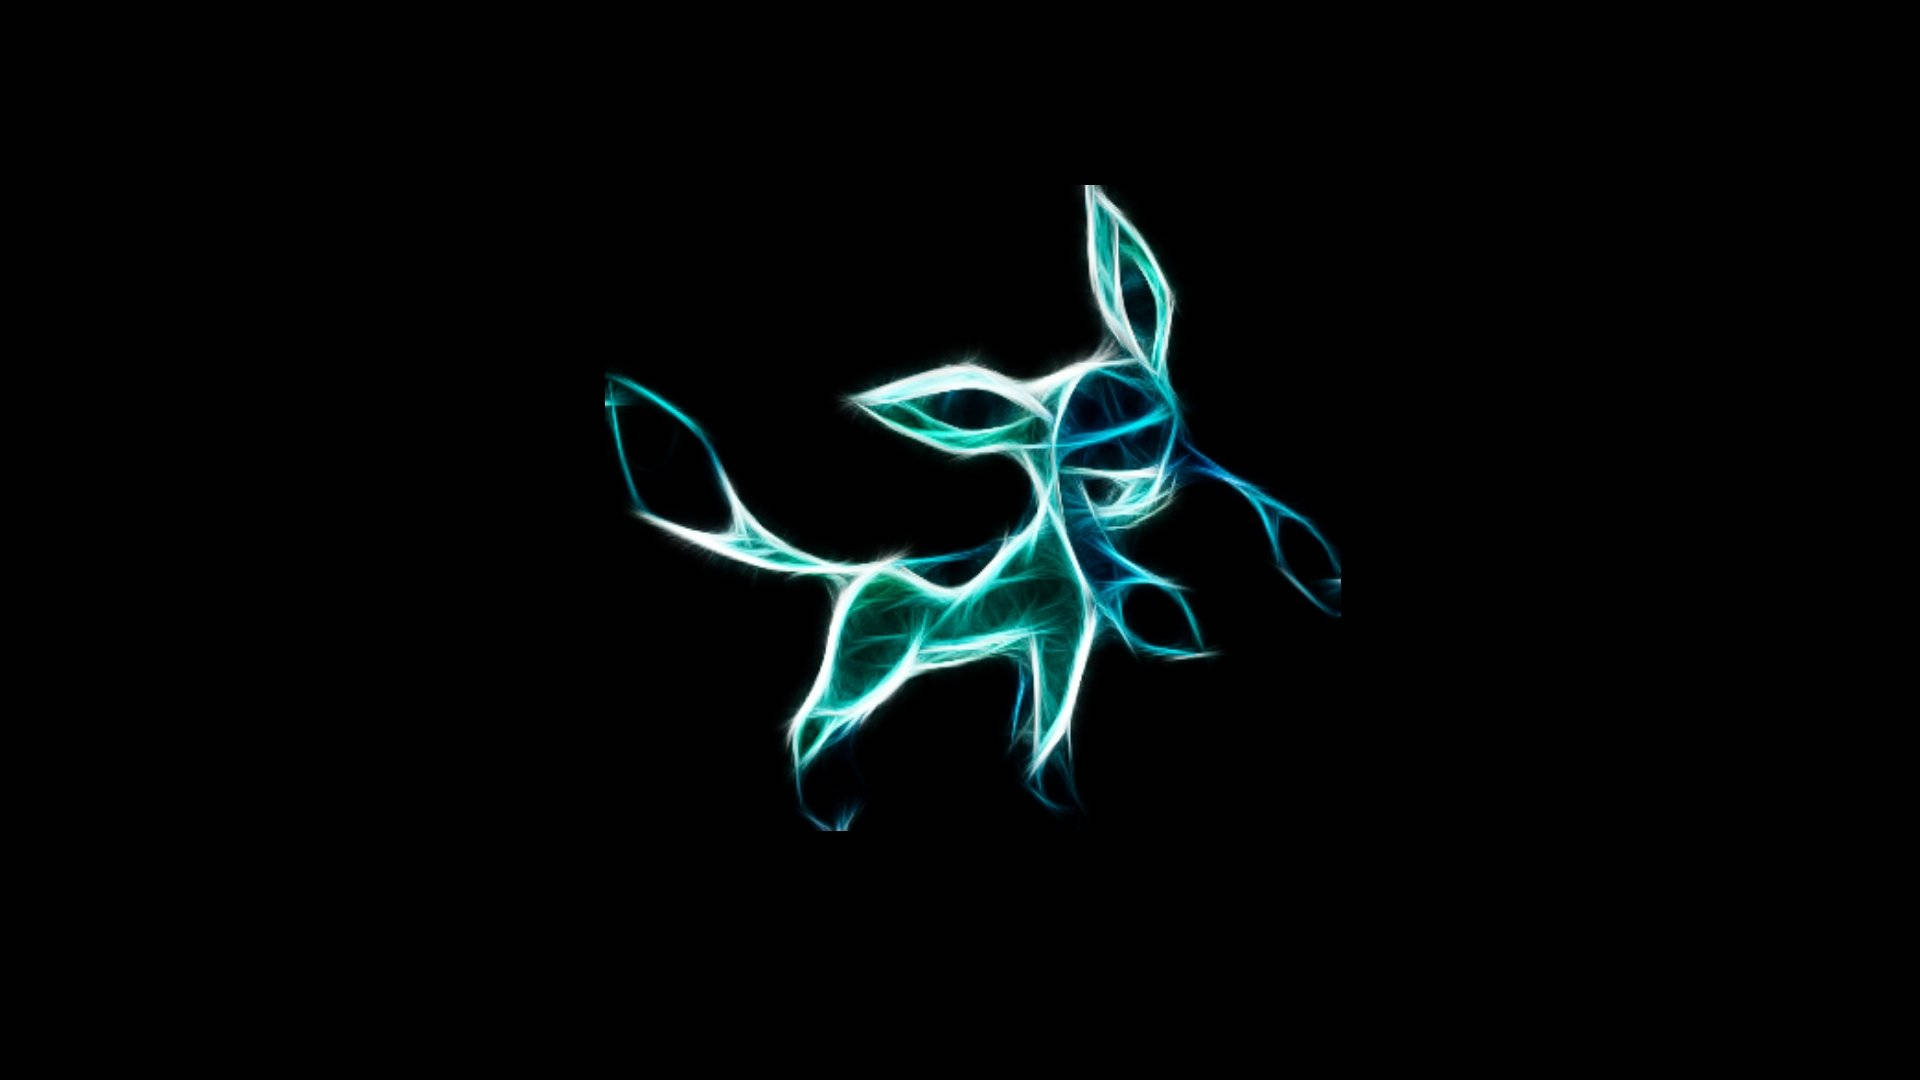 Feel the cool vibes with Glaceon! Wallpaper